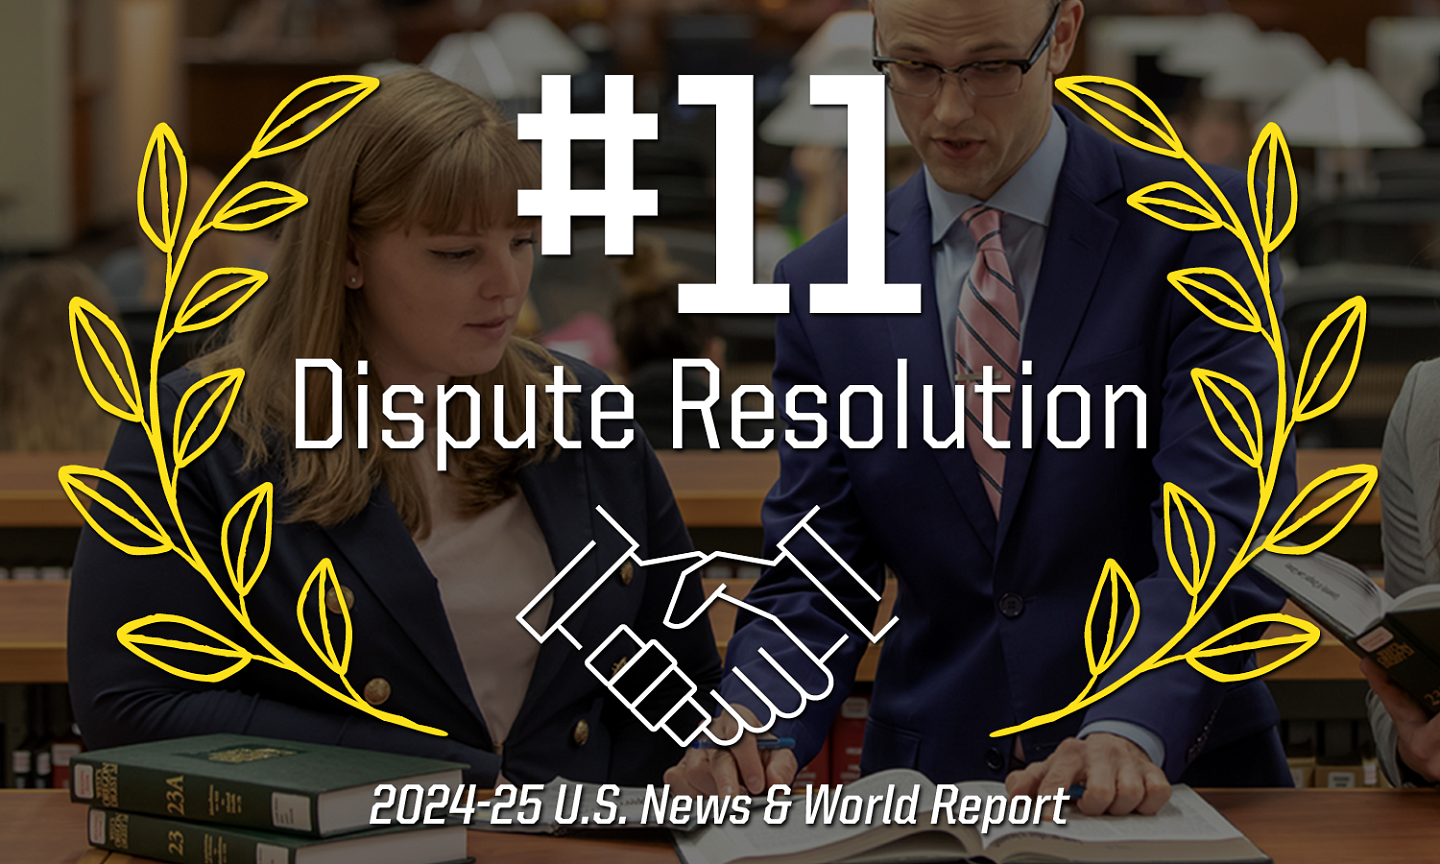 #11 Dispute Resolution. 2024-25 U.S. News and World Report. Image of two students conversing over law book.